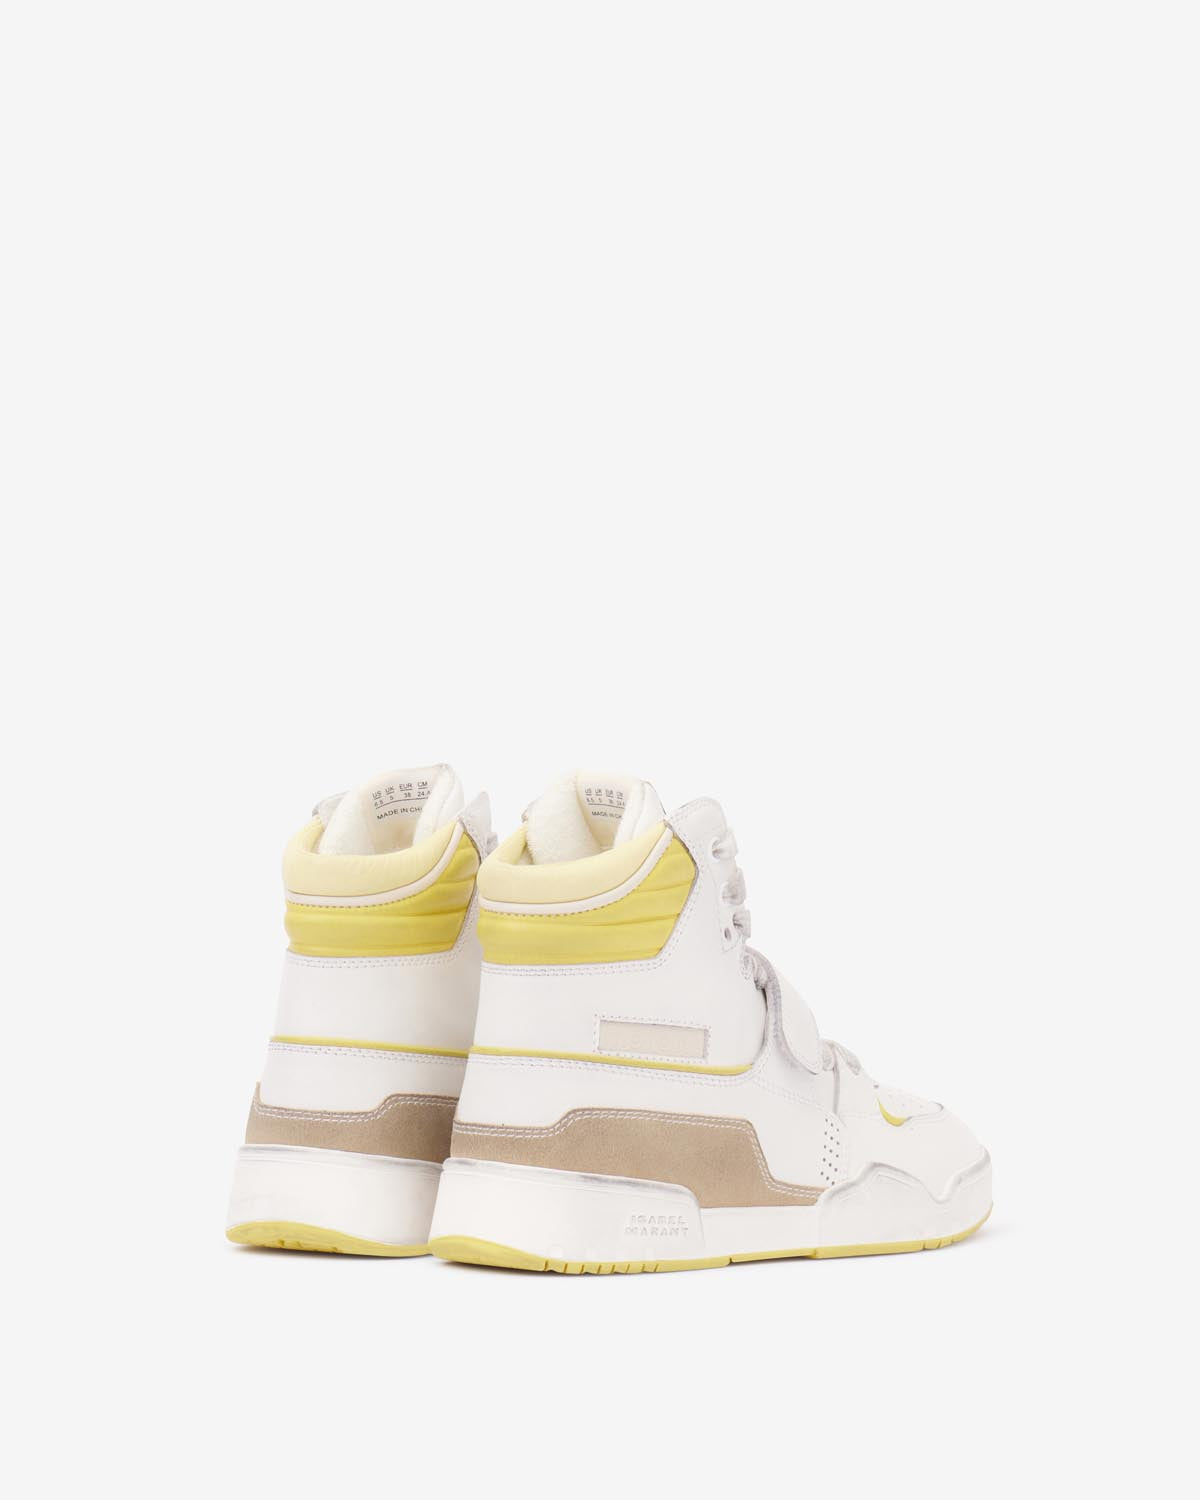 Alsee sneakers Woman Light yellow-yellow 9